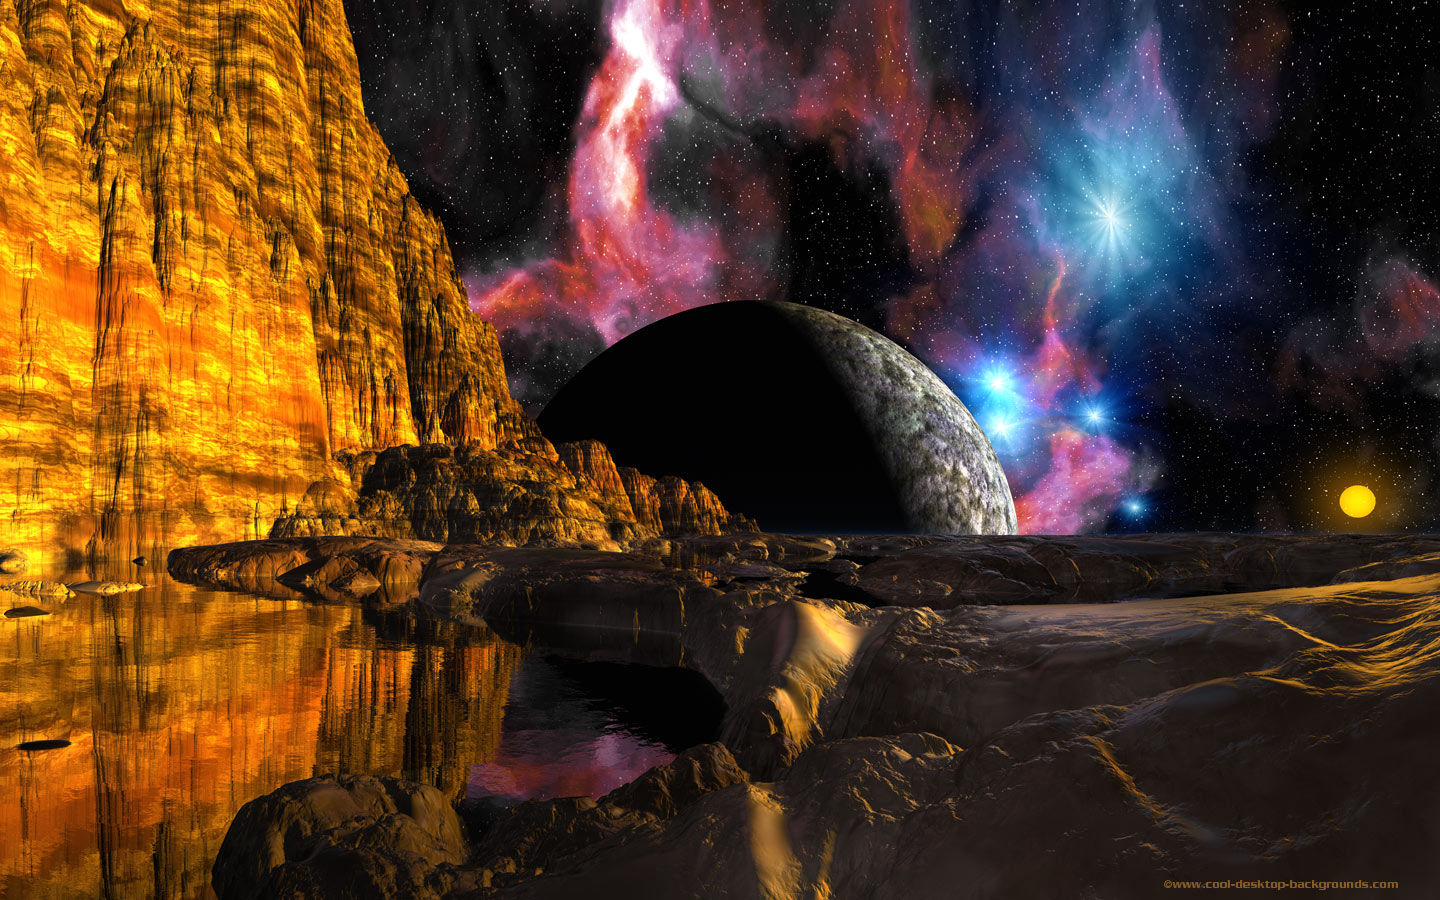 Background Image Of A Moon Rise Beyond Steep Cliffs On An Alien World